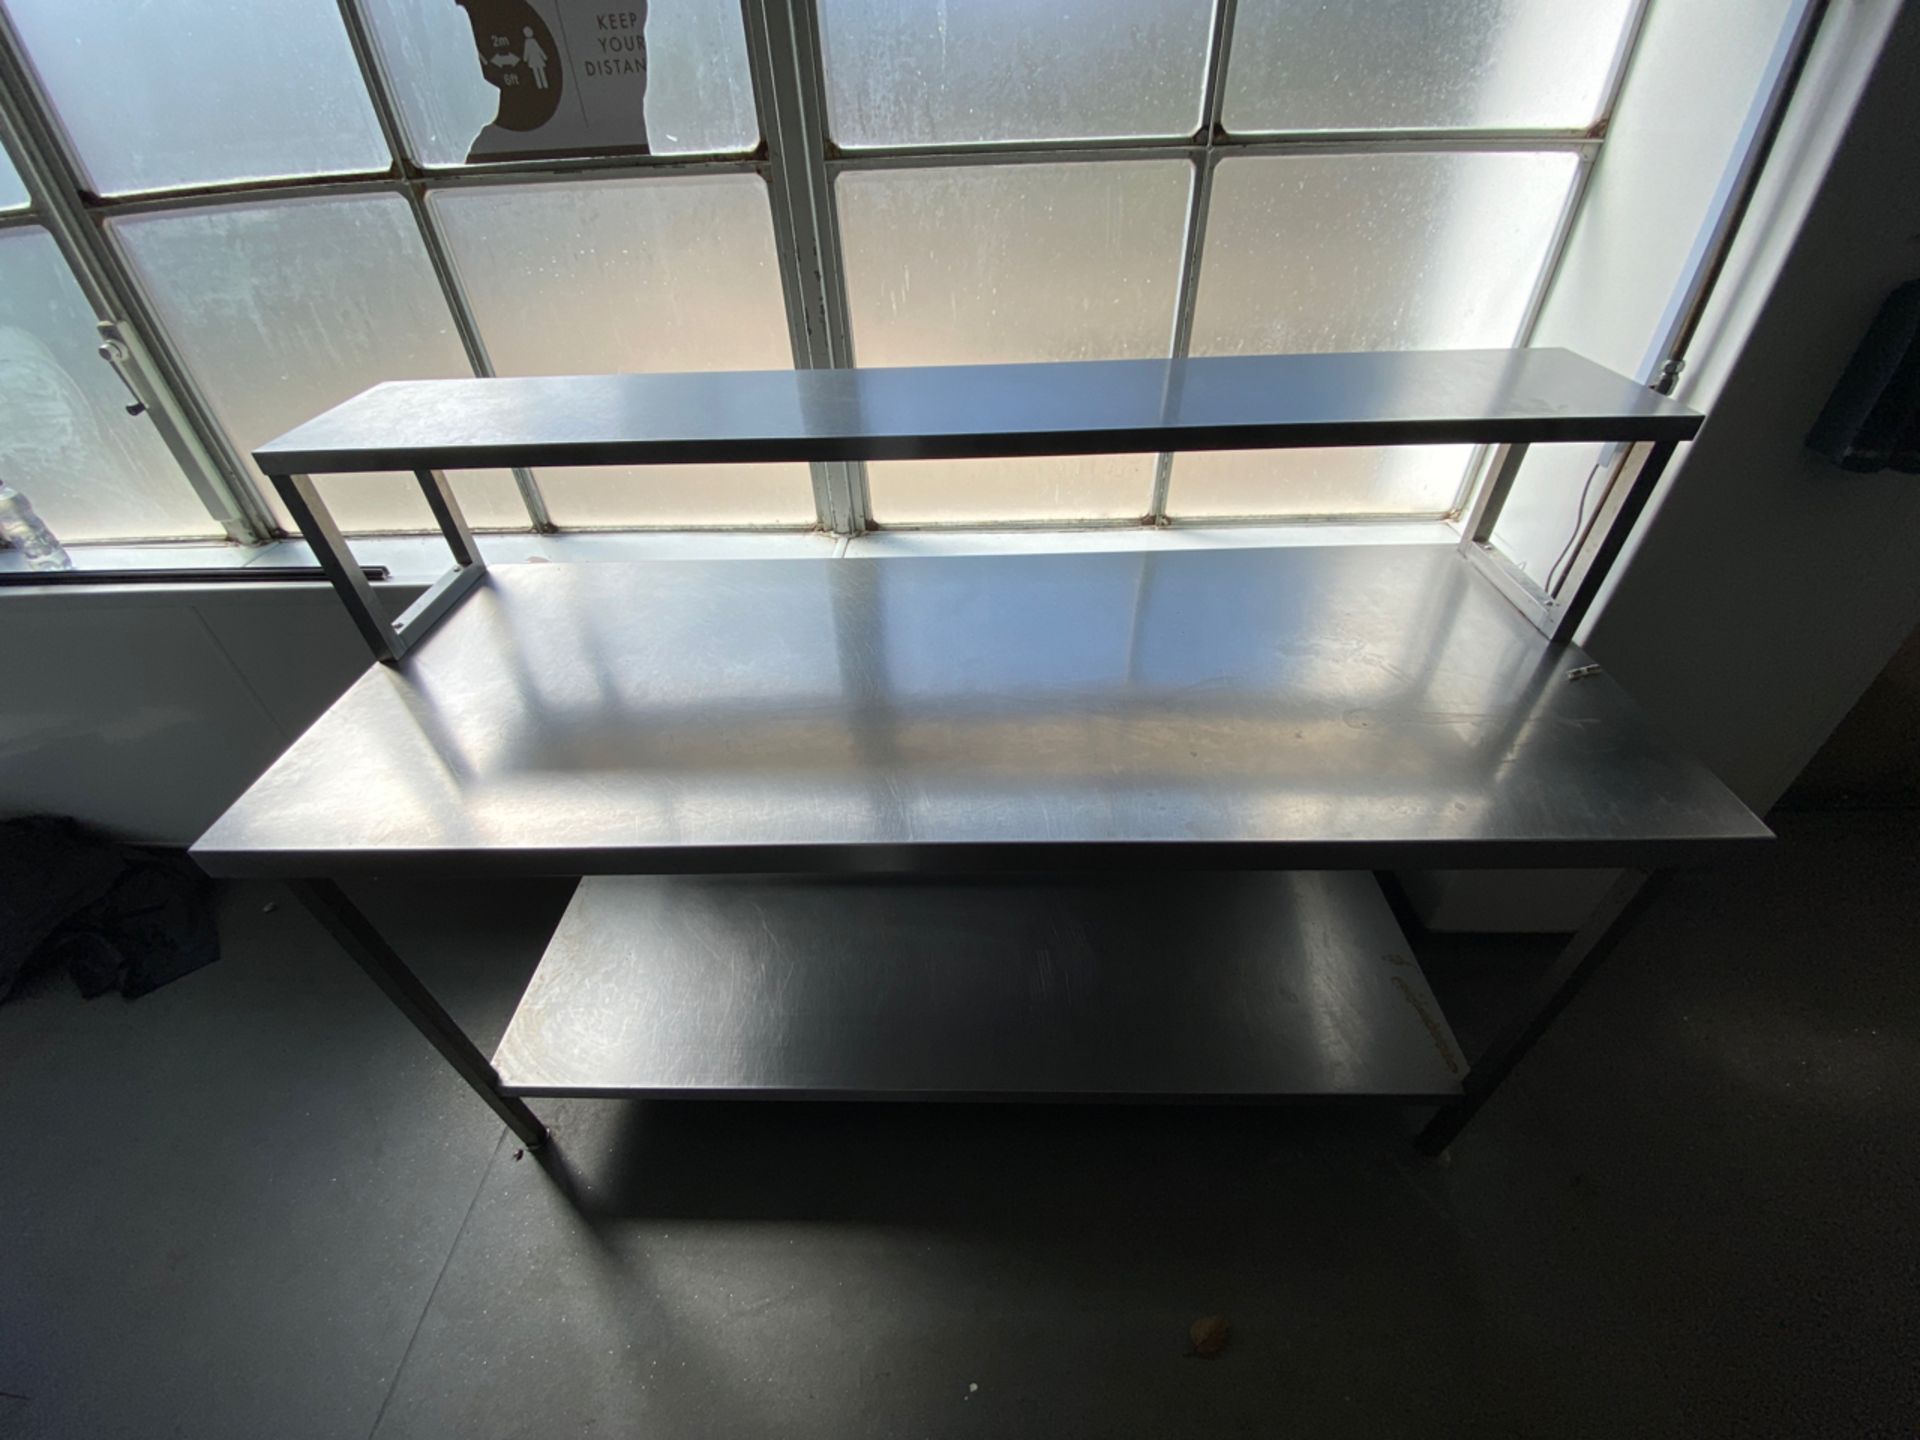 Stainless Steel Preparation Unit - Image 3 of 4